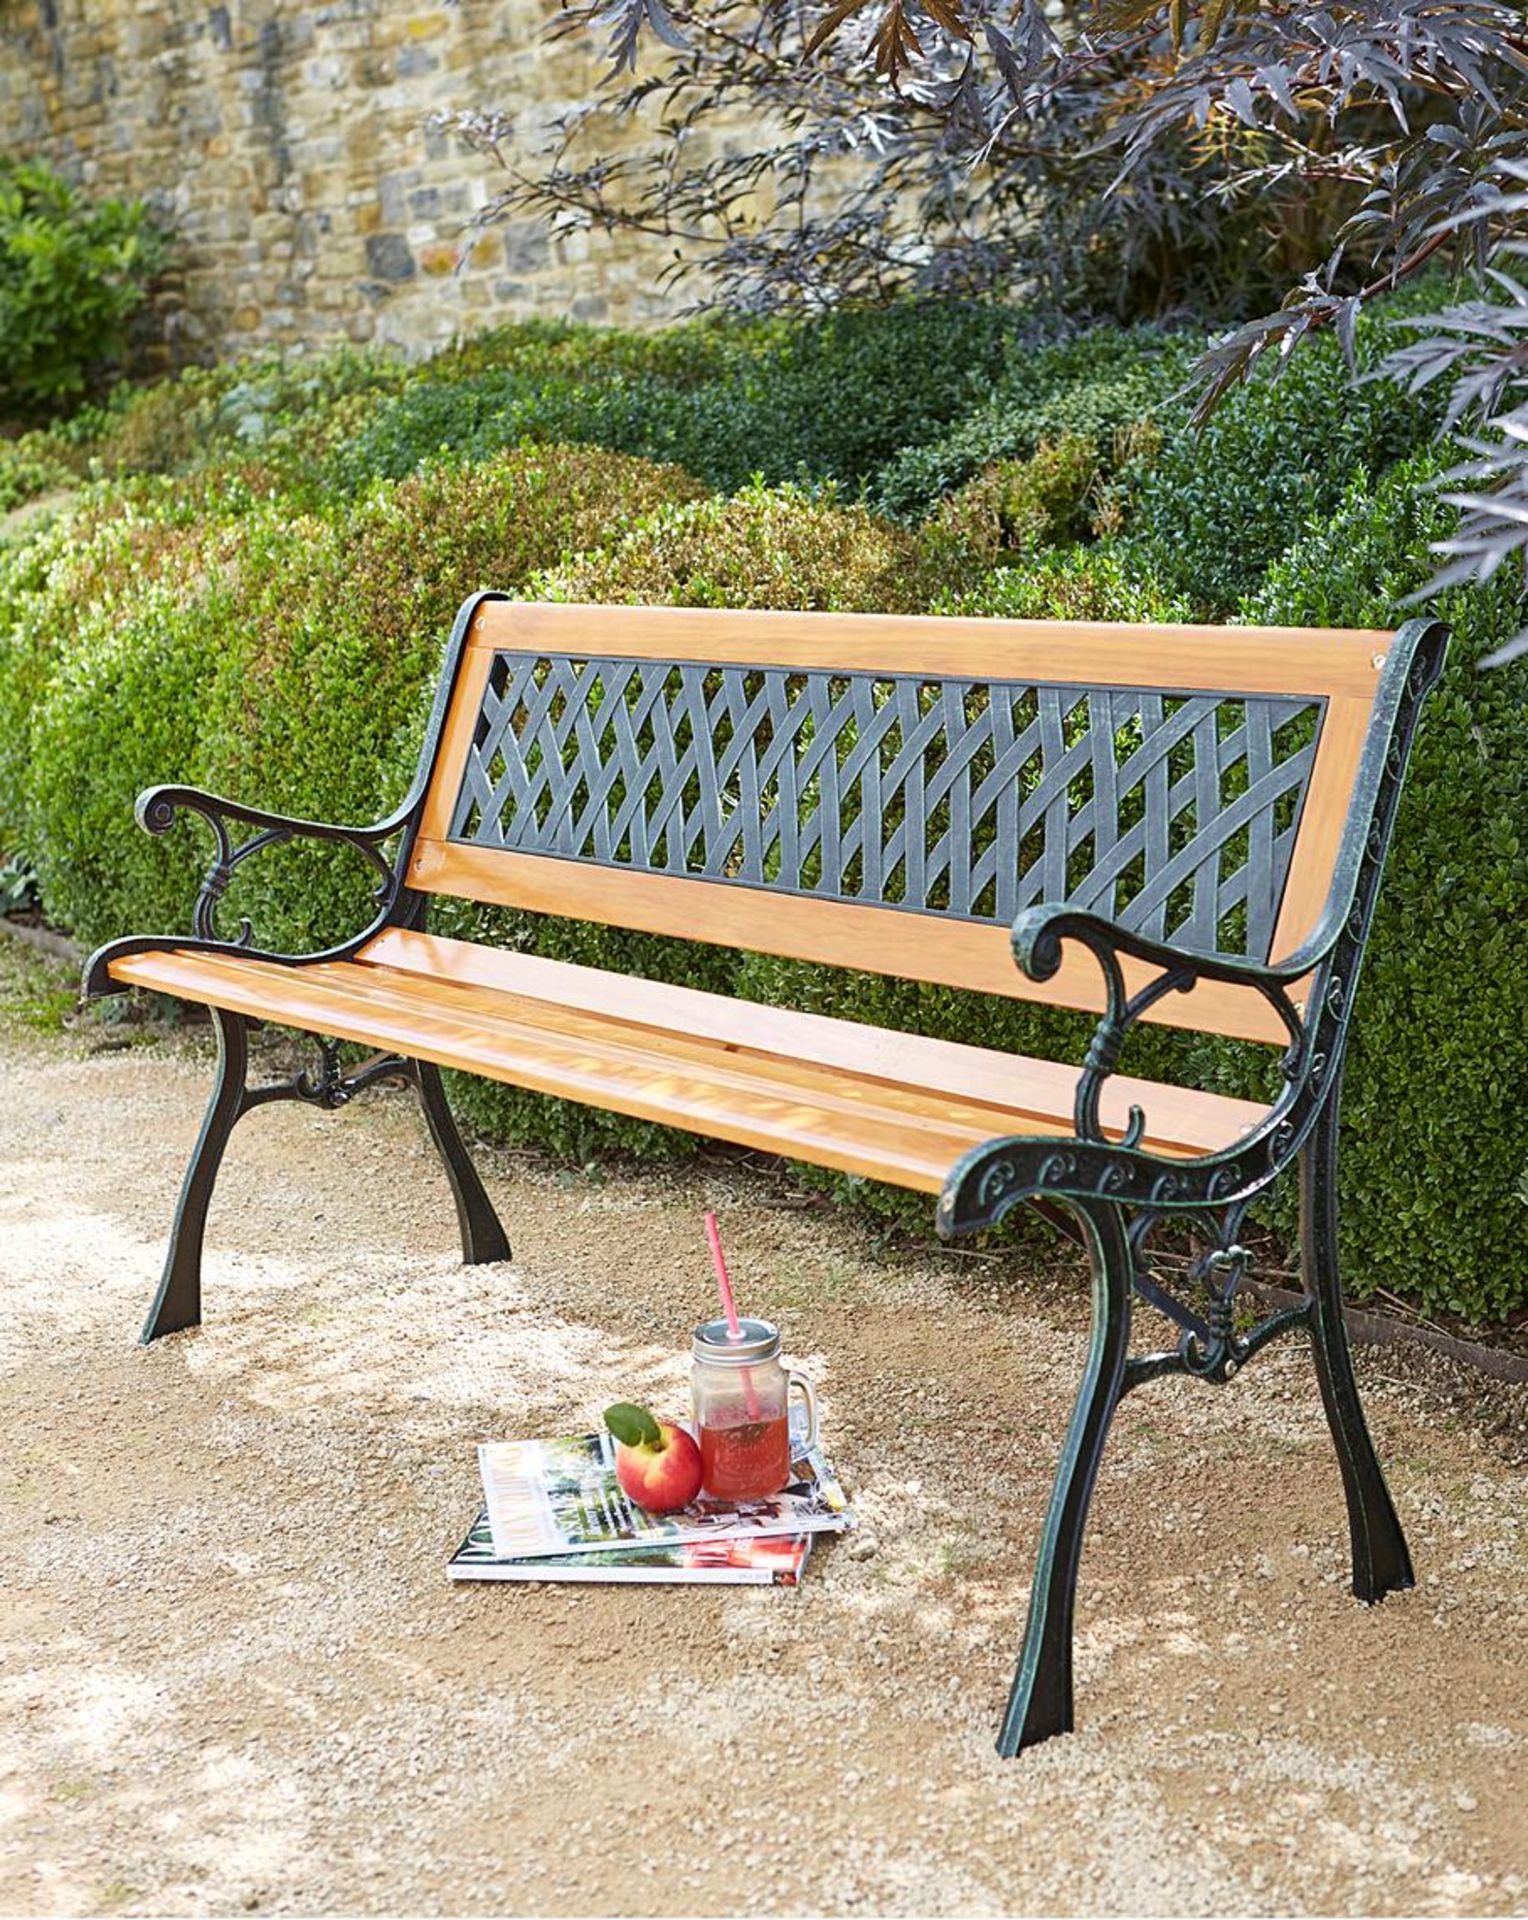 Lacy Bench. - SR4. This wooden bench has a strong iron frame with a lattice back. This traditional